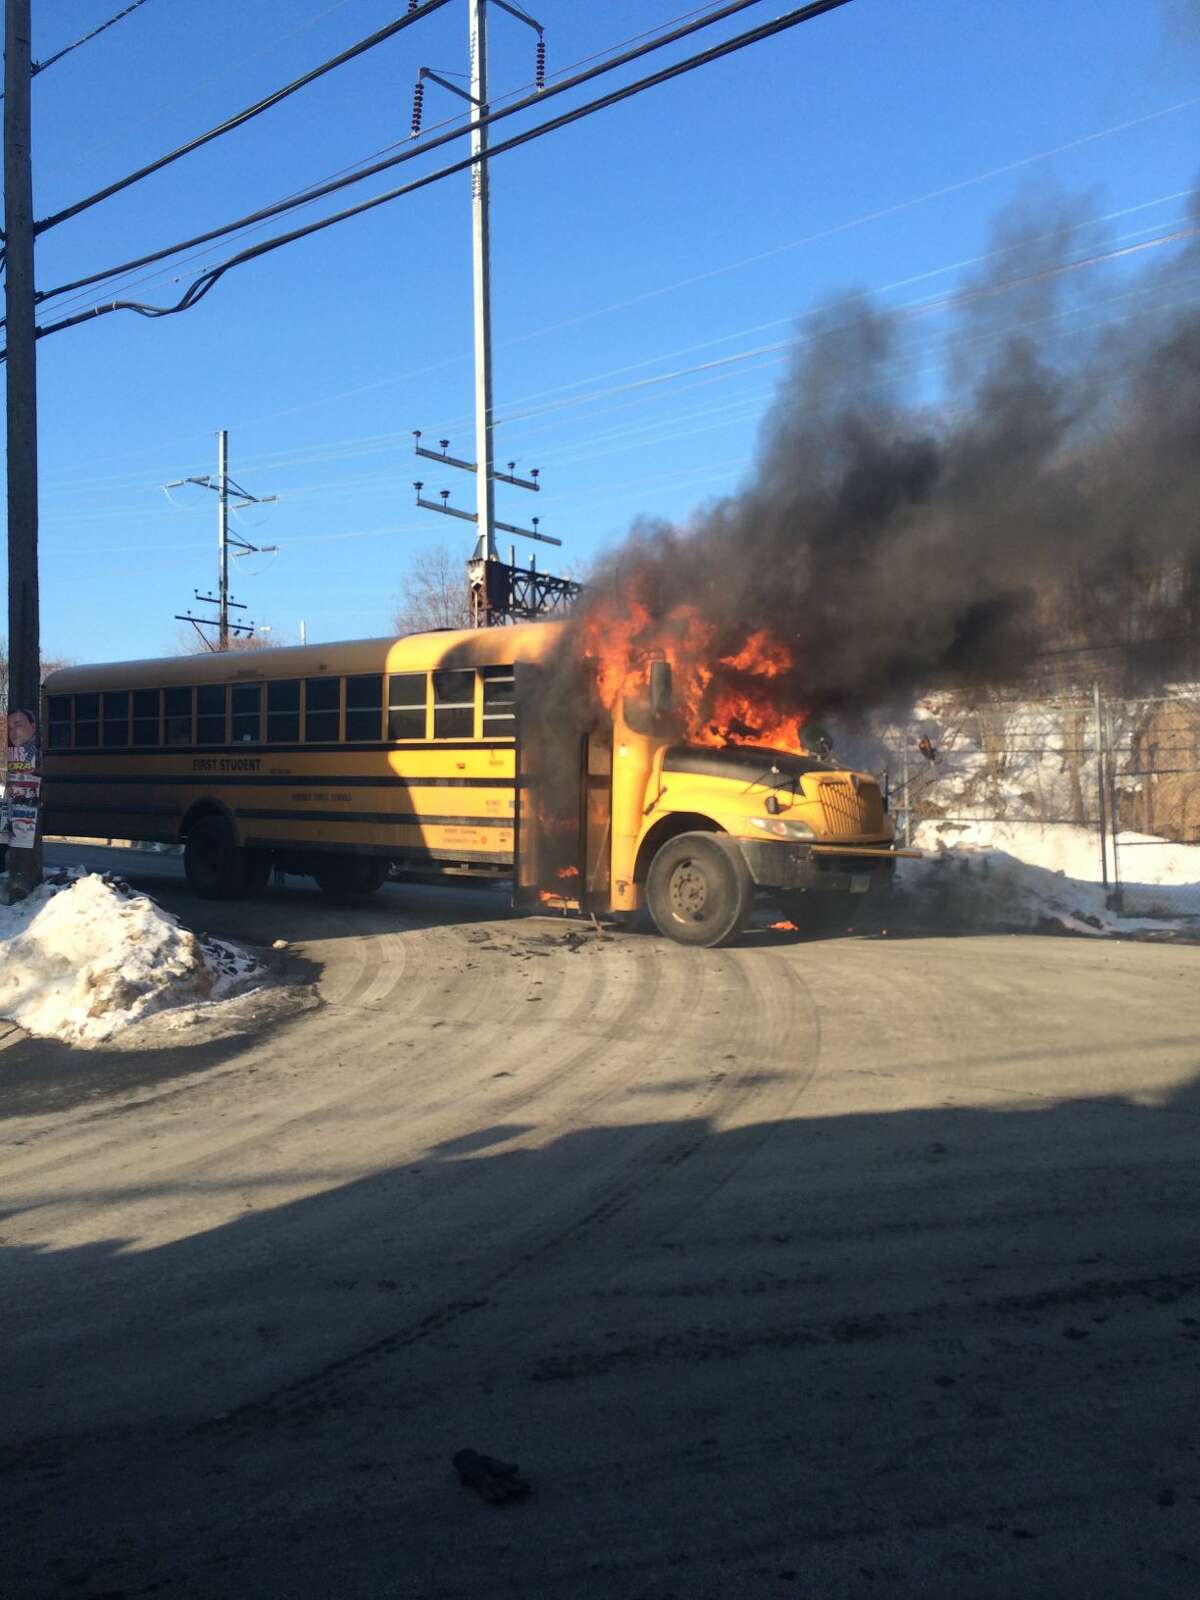 Contributed photo by Norwalk Fire Department Bus catches fire in South Norwalk. All passengers evacuated safely.